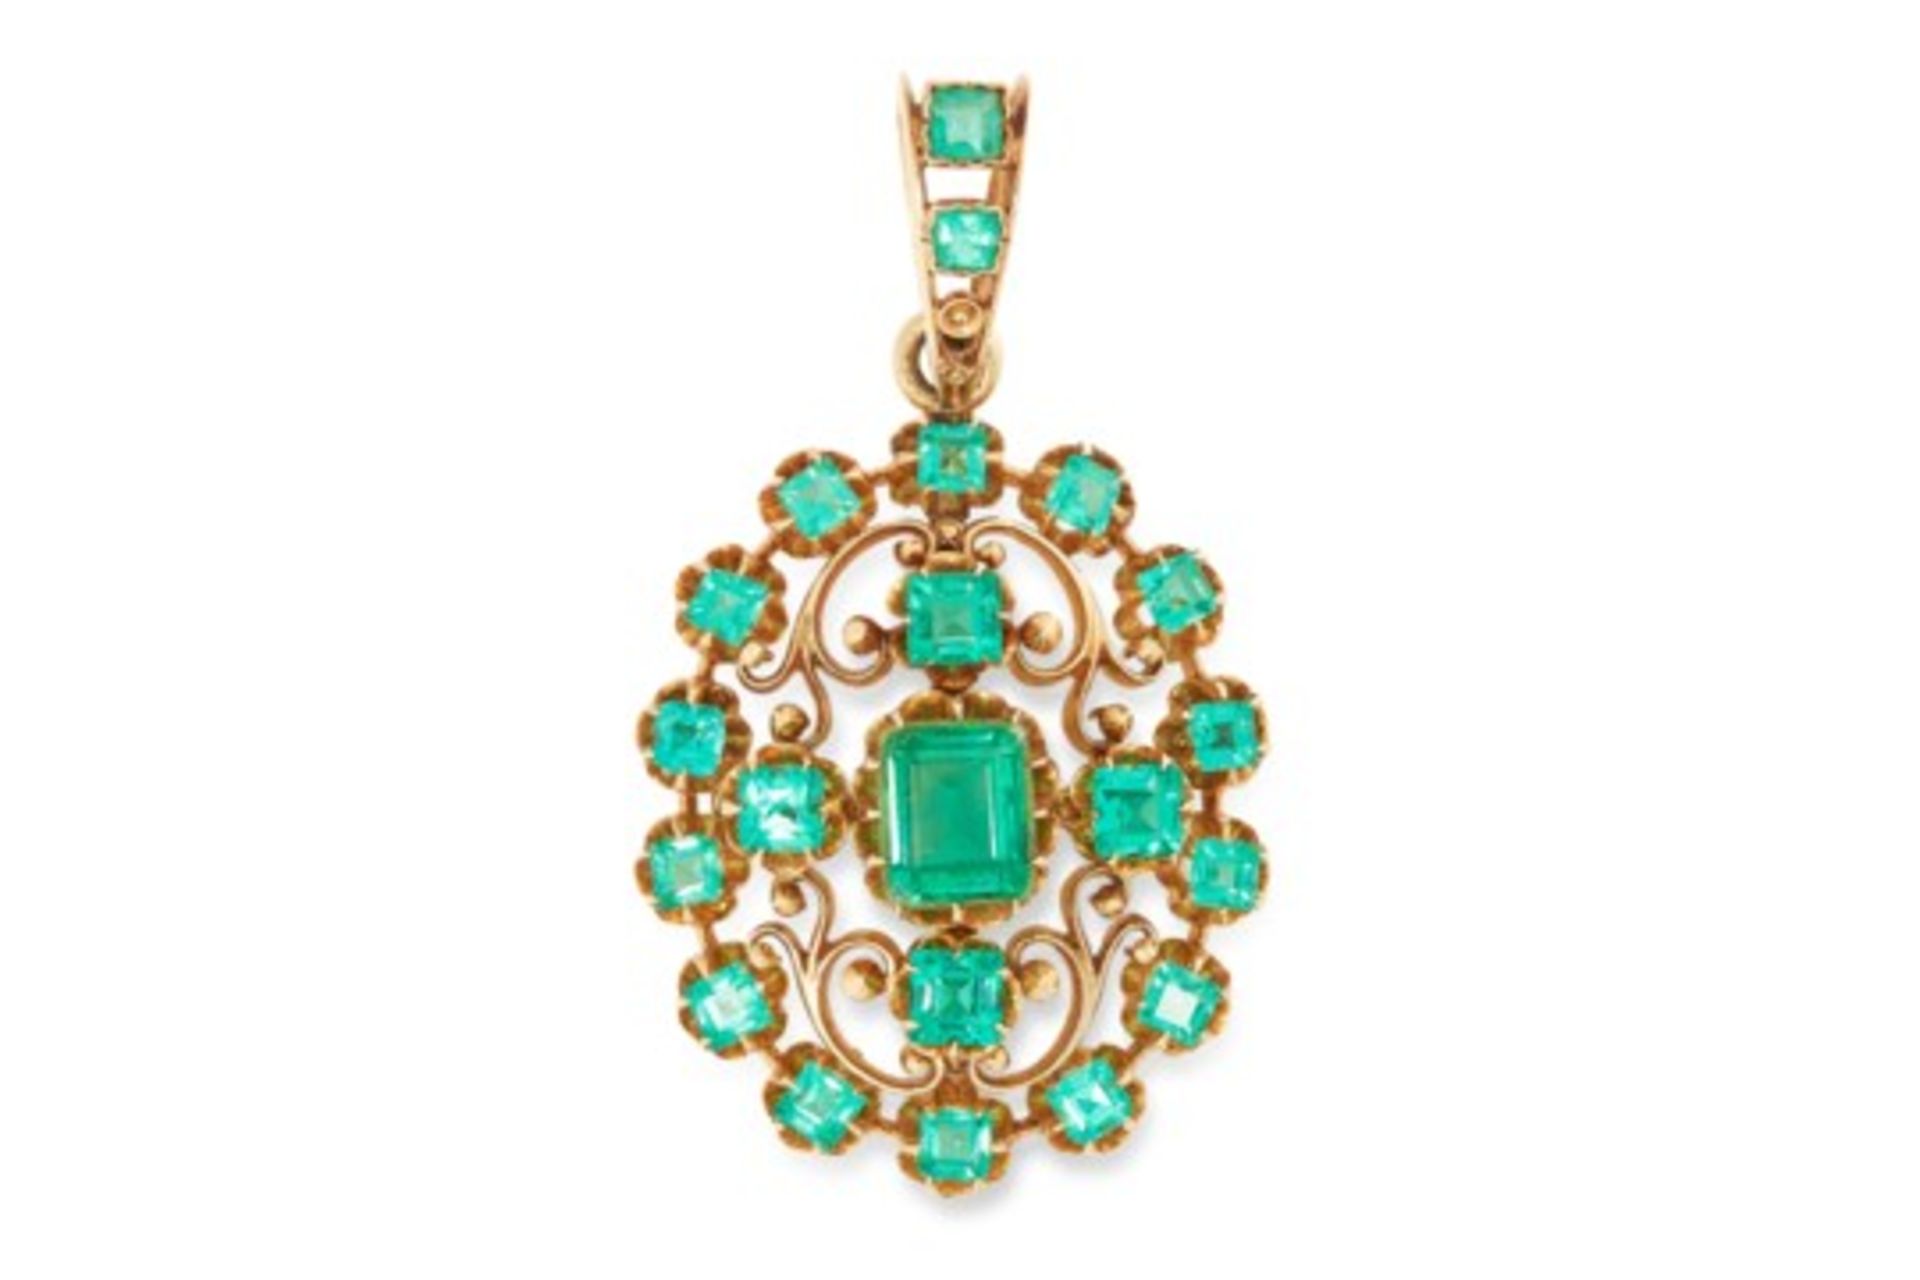 AN ANTIQUE EMERALD PENDANT in open scrolling design set with emerald and square cut emerald